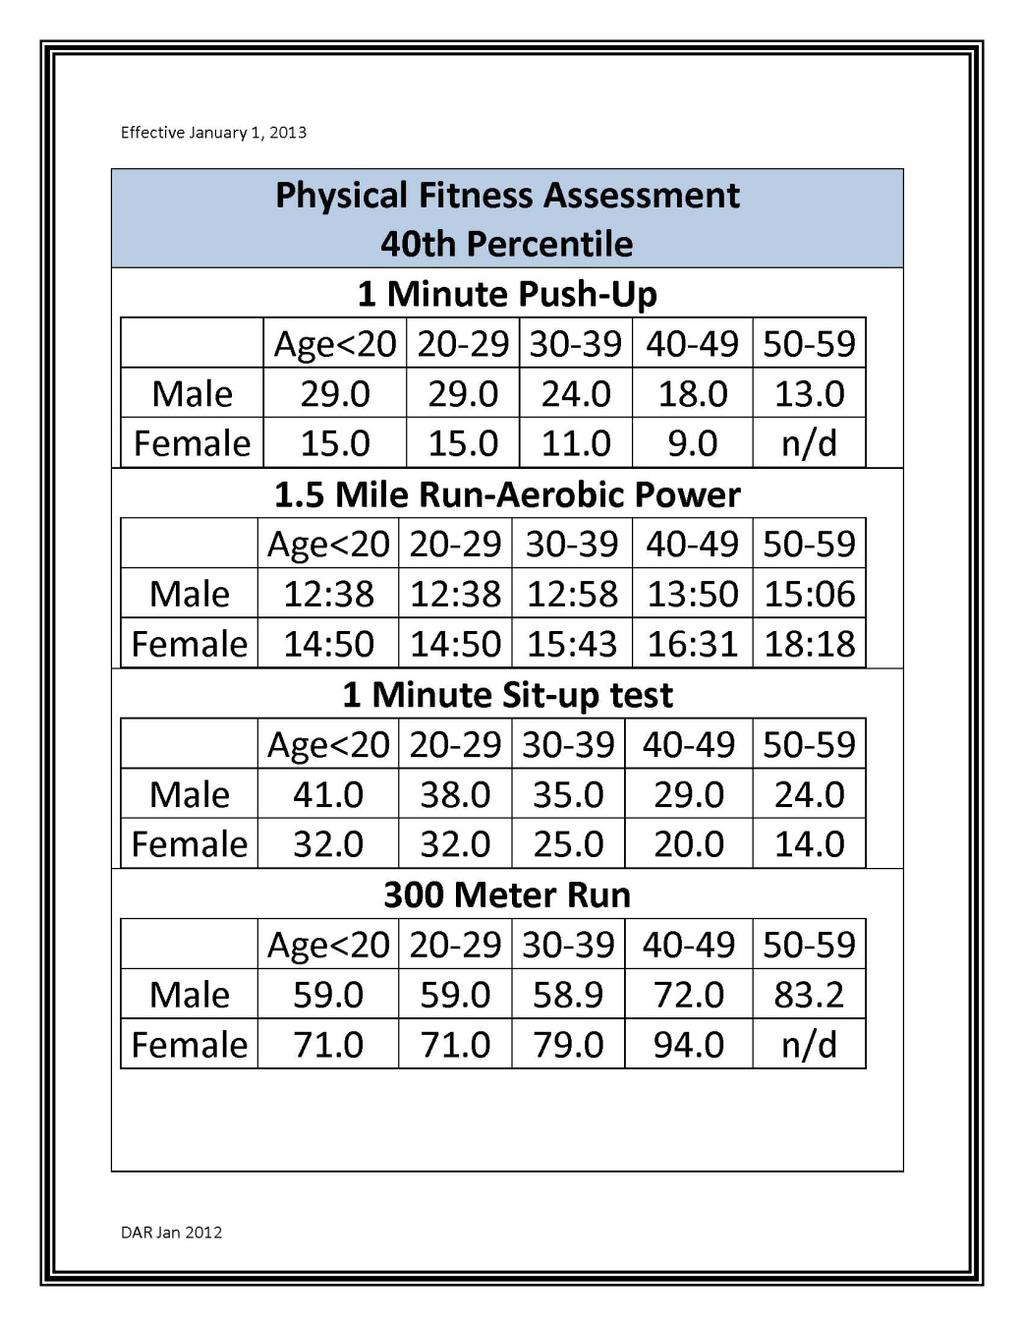 How Will Physical Fitness Be Measured? Minimum Physical Fitness Entrance Standards The Physical Fitness Test battery consists of the 4 following basic tests. 1. 1 Minute Push-Up 2. 1.5 Mile Run Aerobic Power 3.